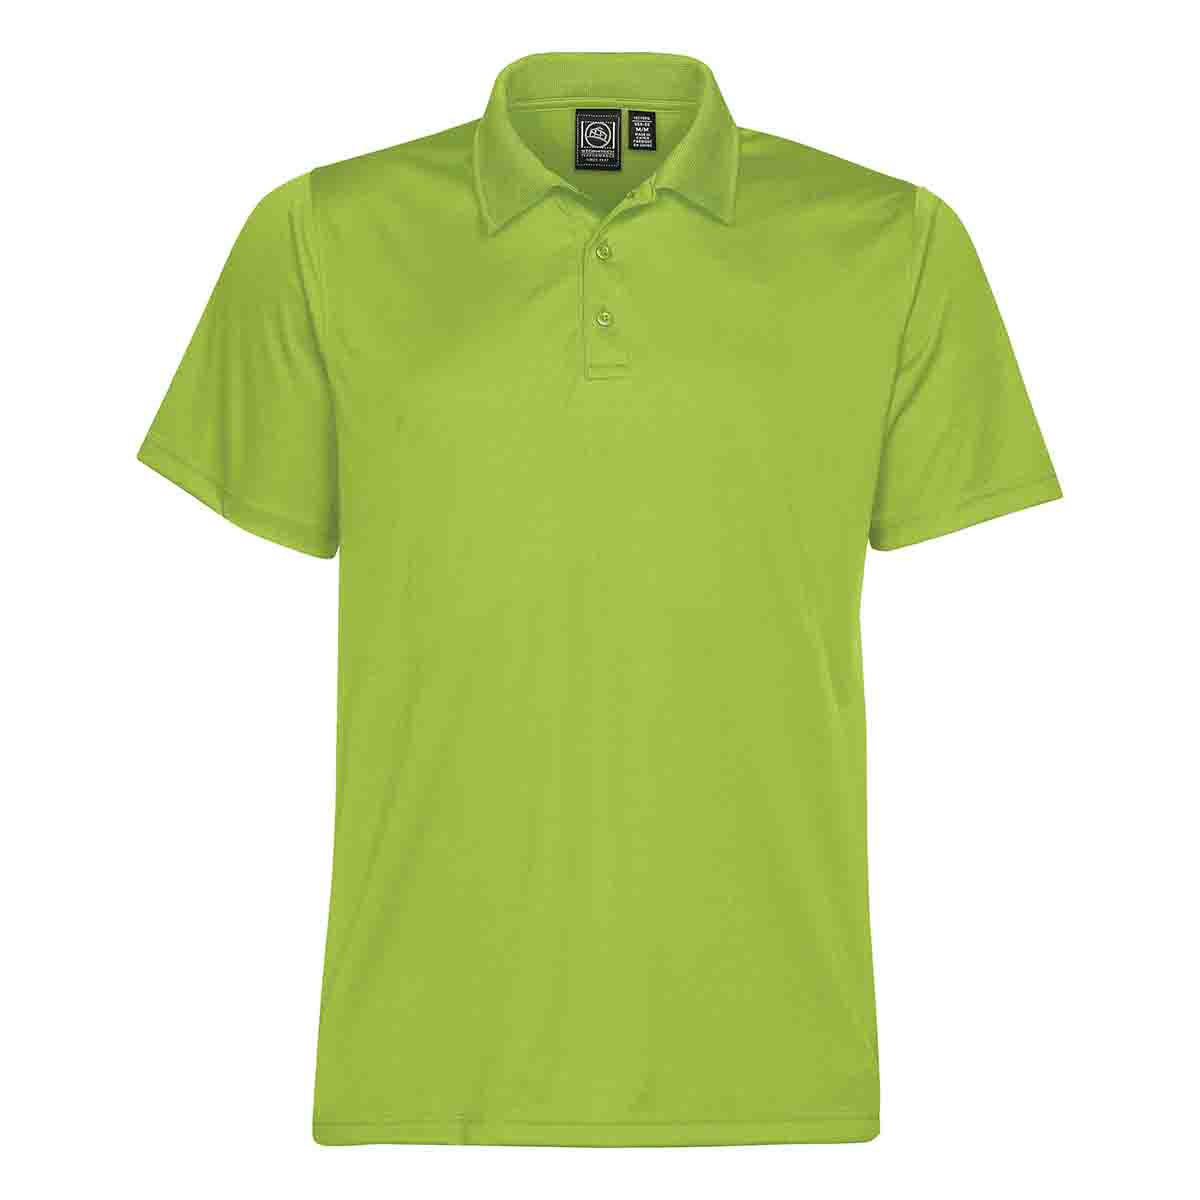 Superdry polo model Eclipse